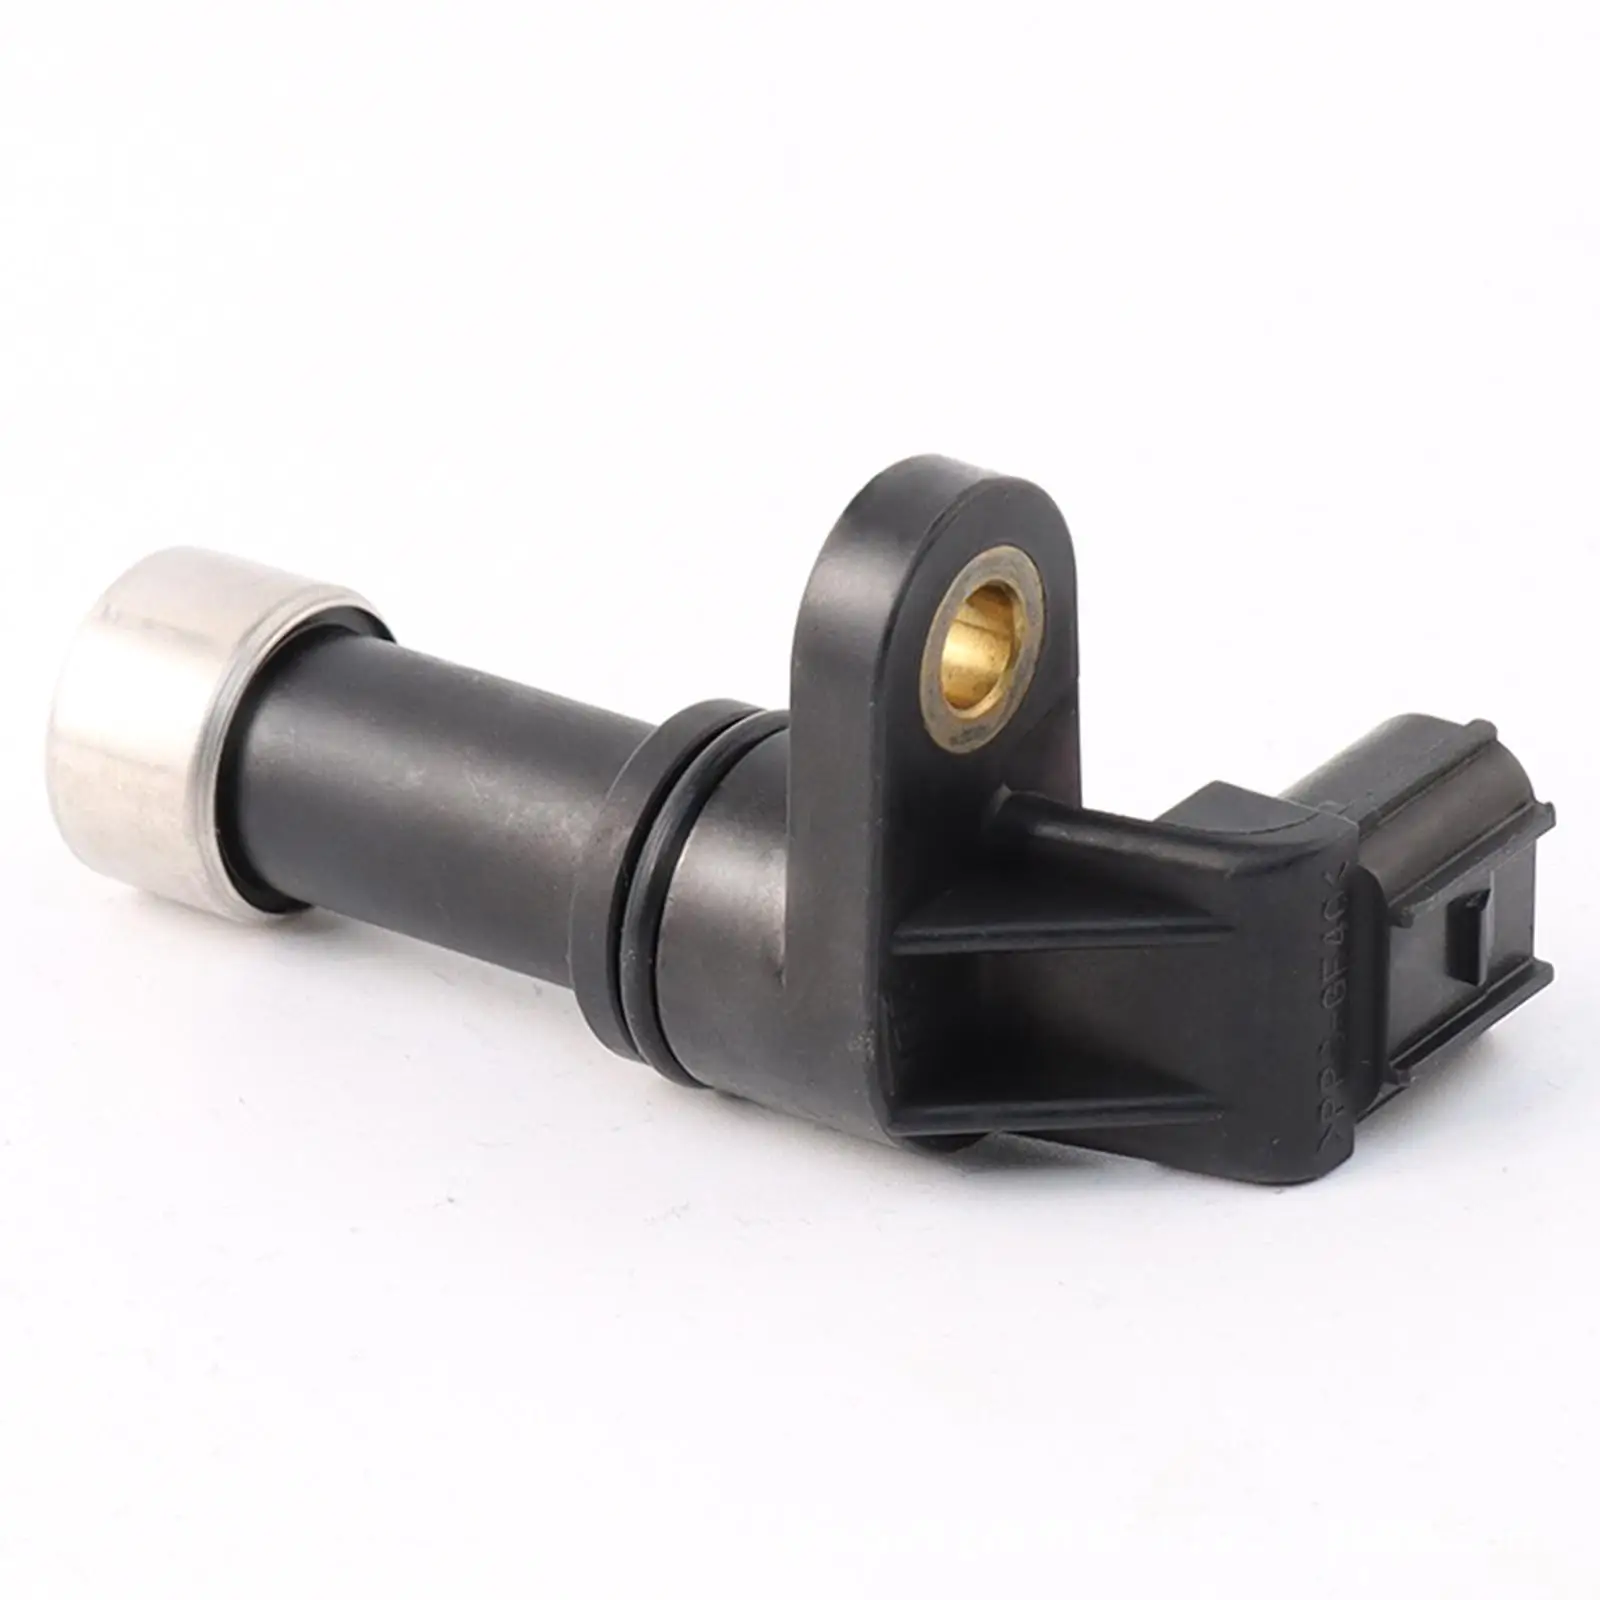 Car Trans Speed Sensor 28810-Rpc-013 for Honda Civic Fit Accessories Easy